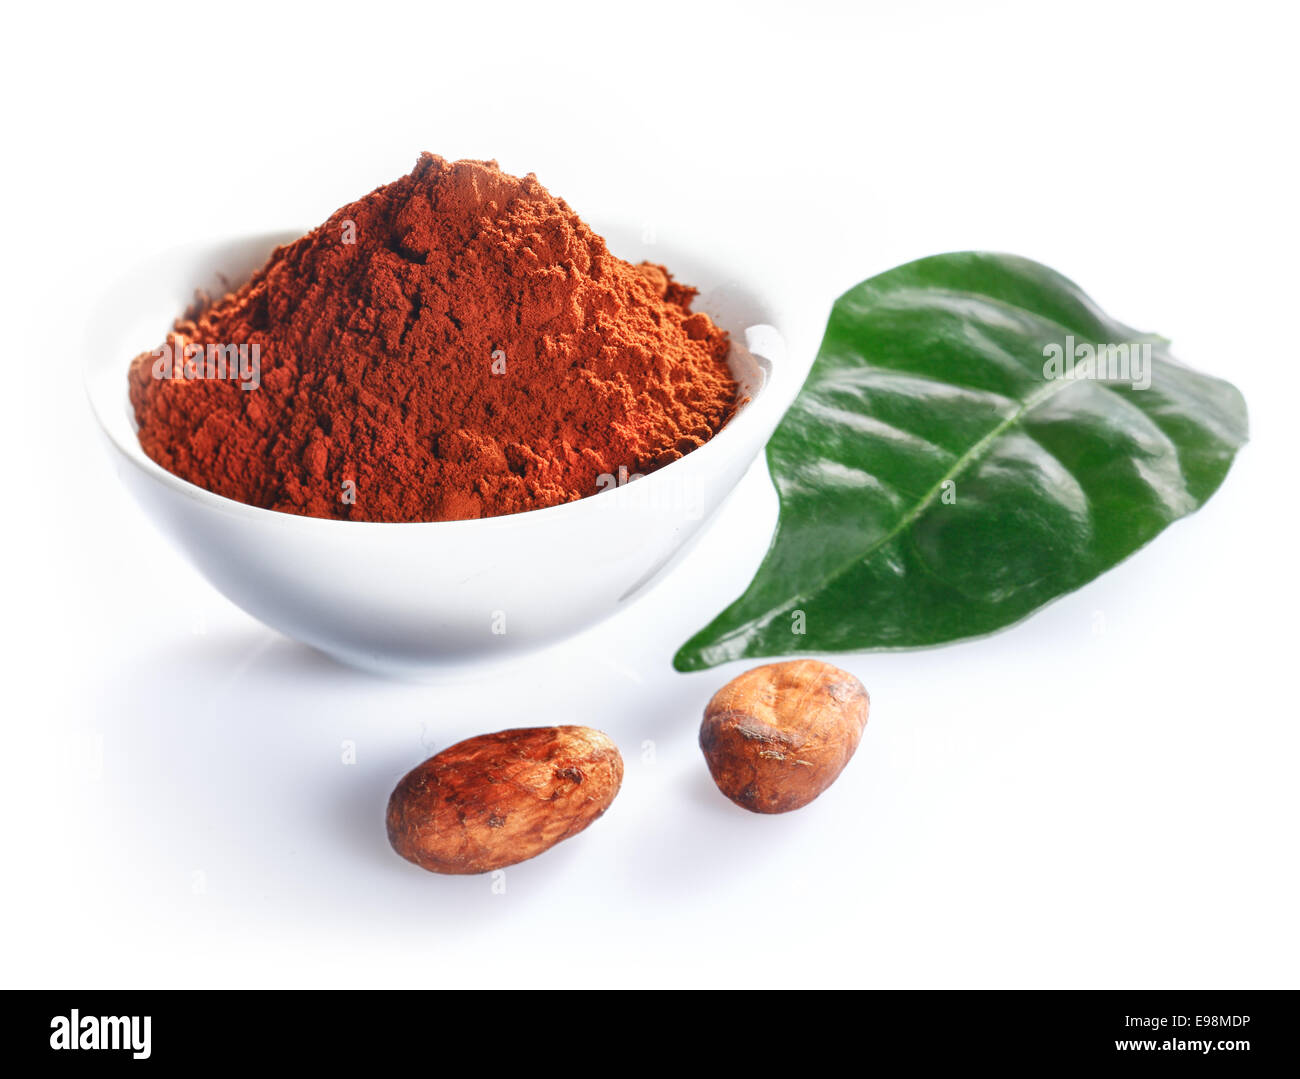 Cacao beans, leaf and cacao powder isolated on white Stock Photo